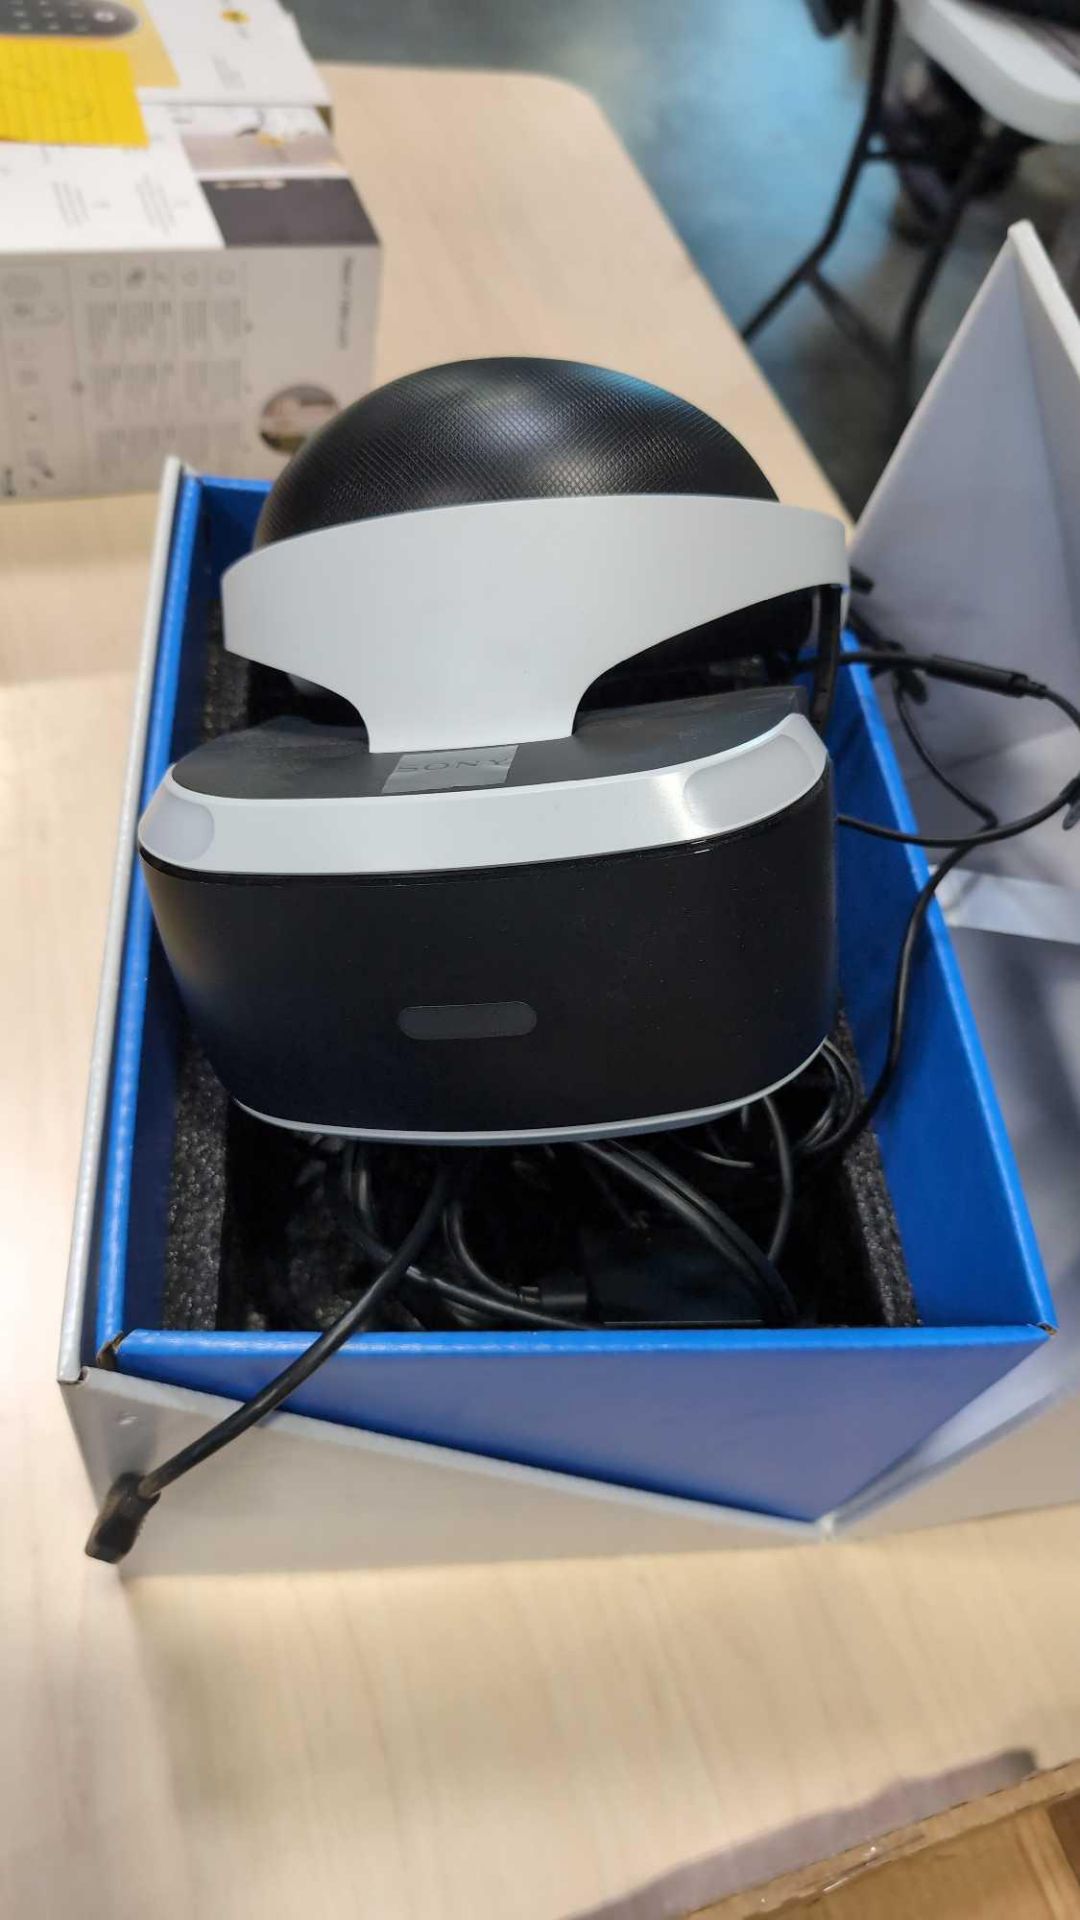 PlayStation VR headset - Image 6 of 6